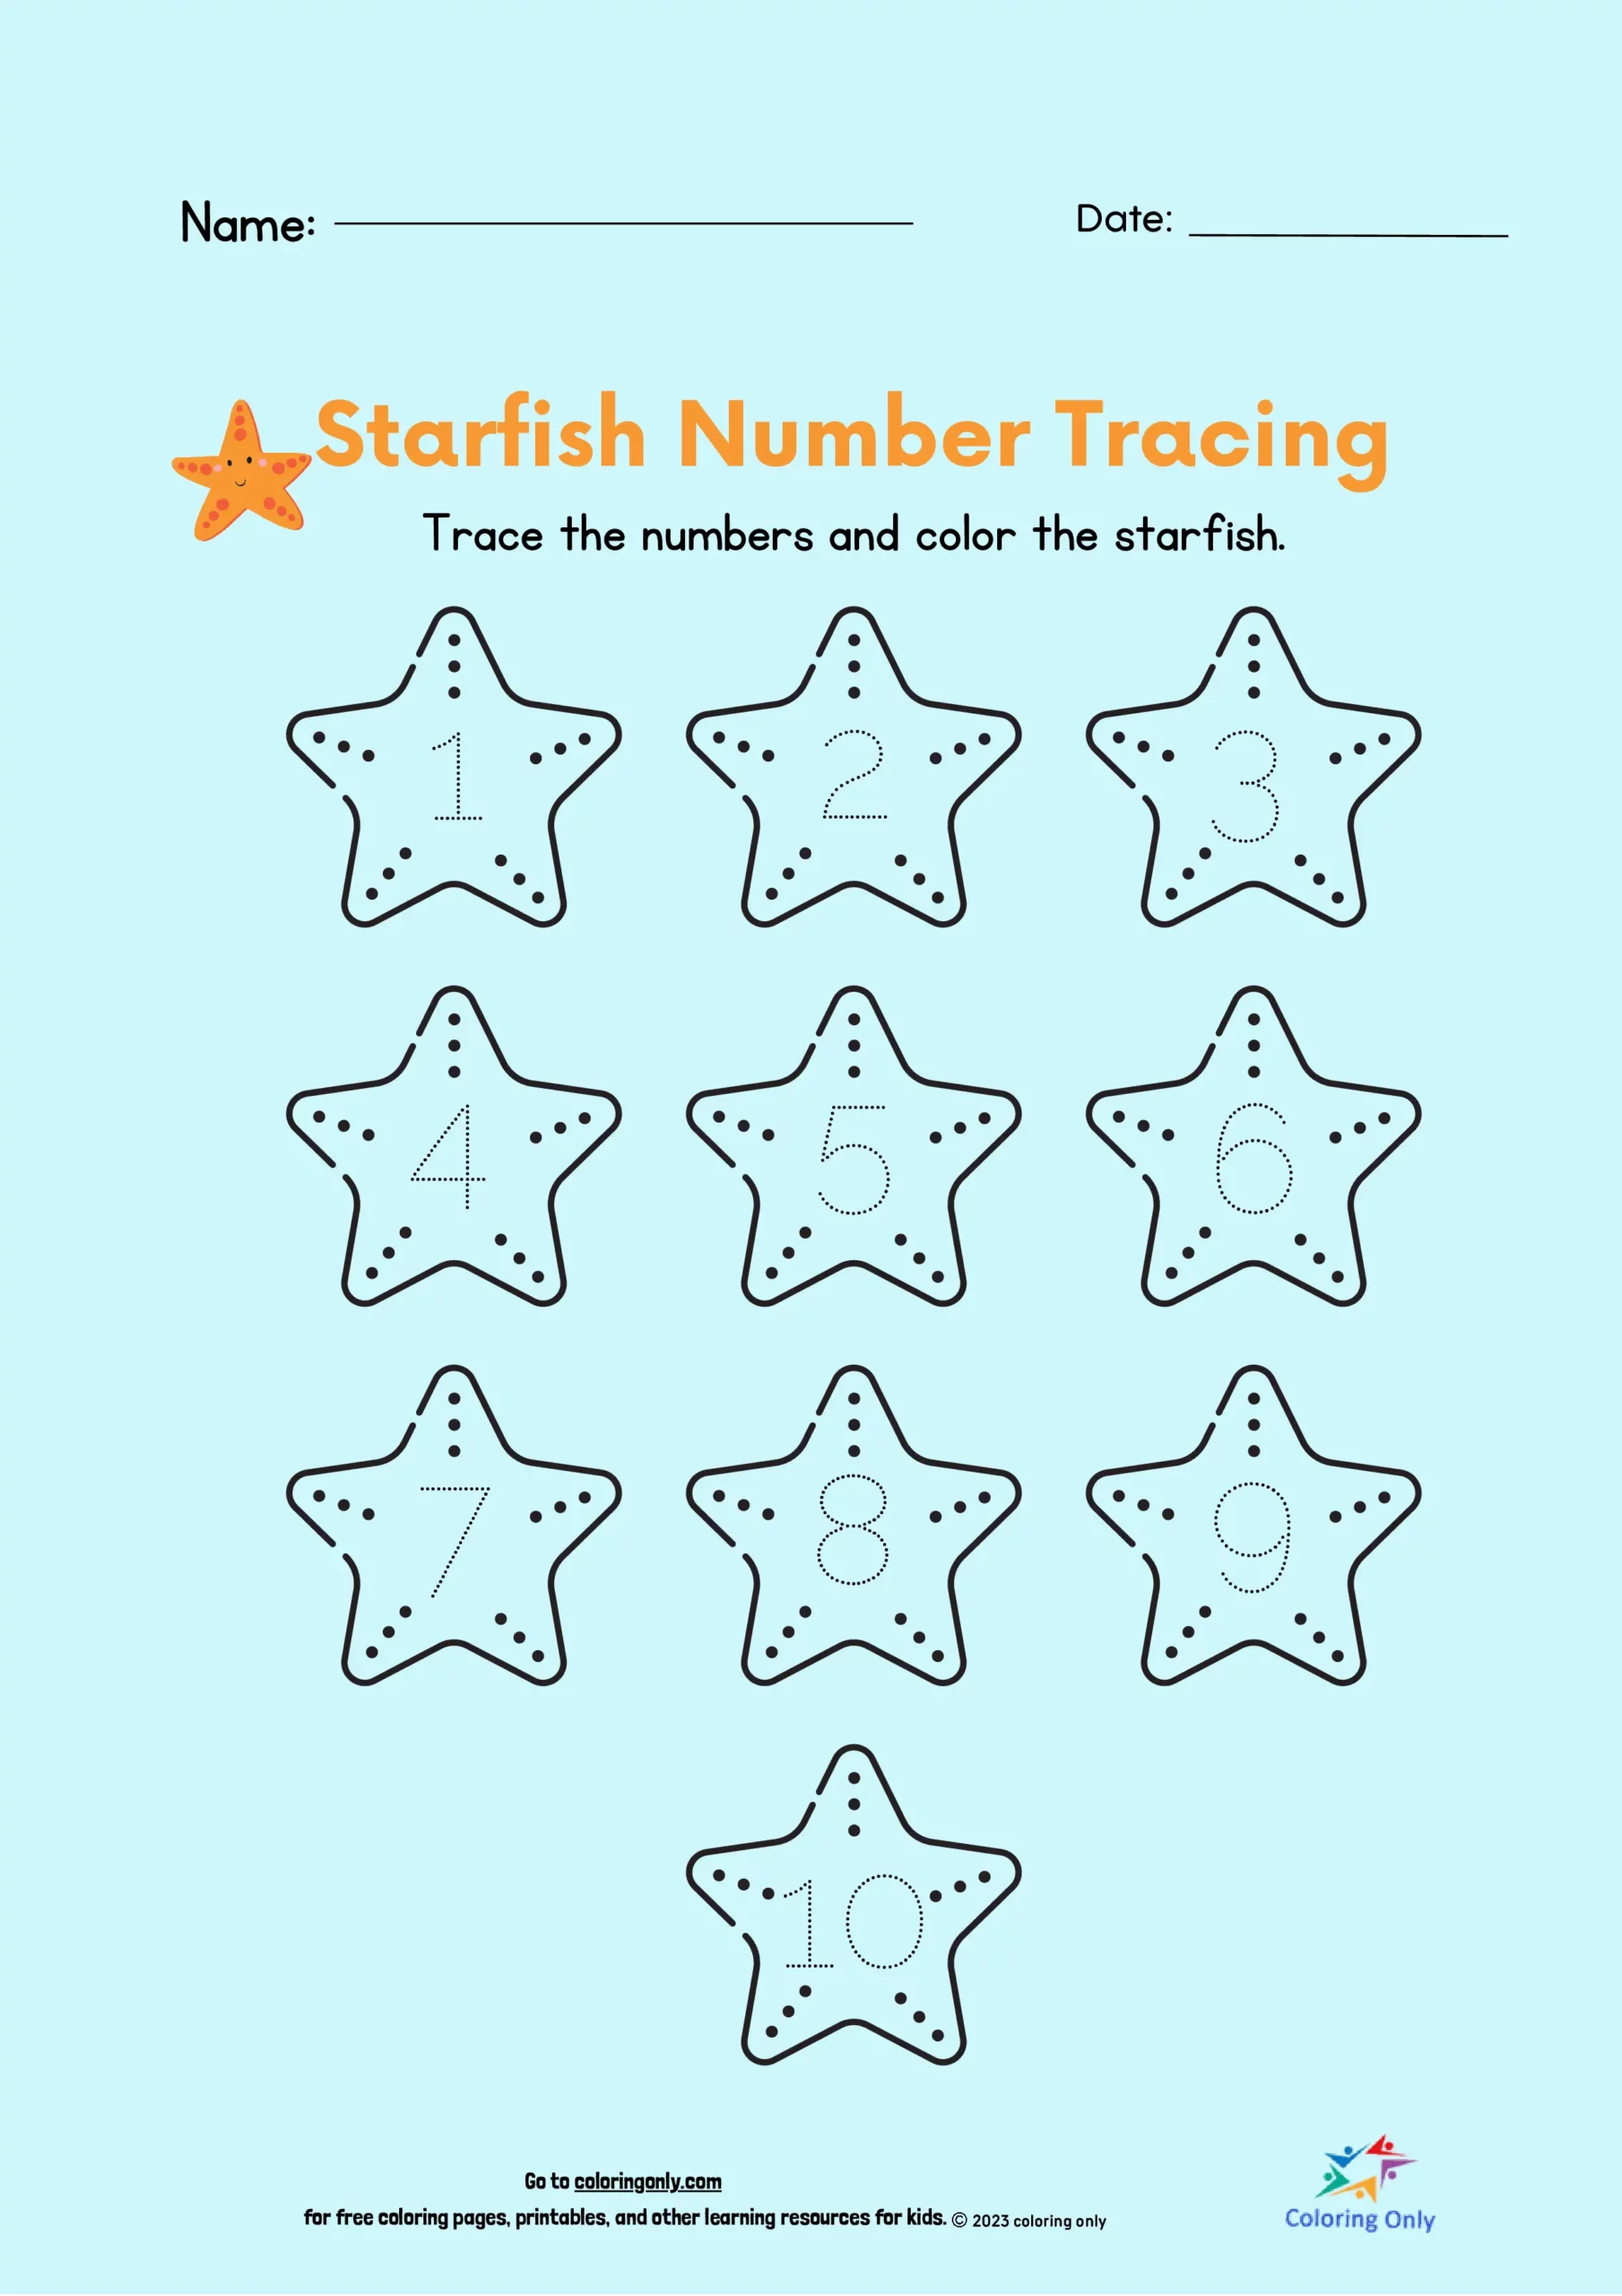 Star Number Tracing